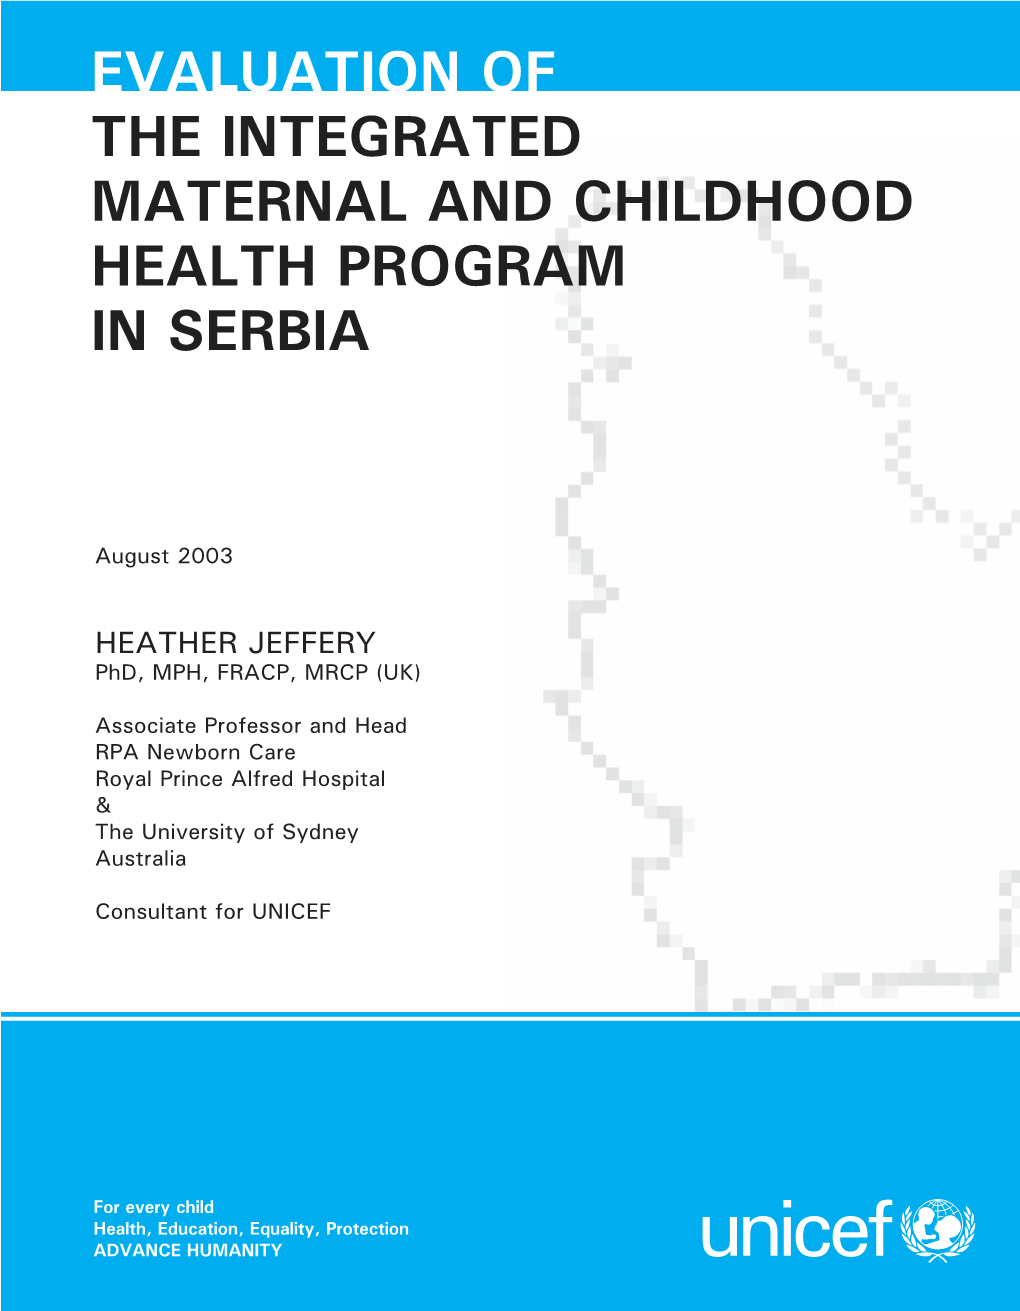 Evaluation of the Integrated Maternal and Childhood Health Program in Serbia